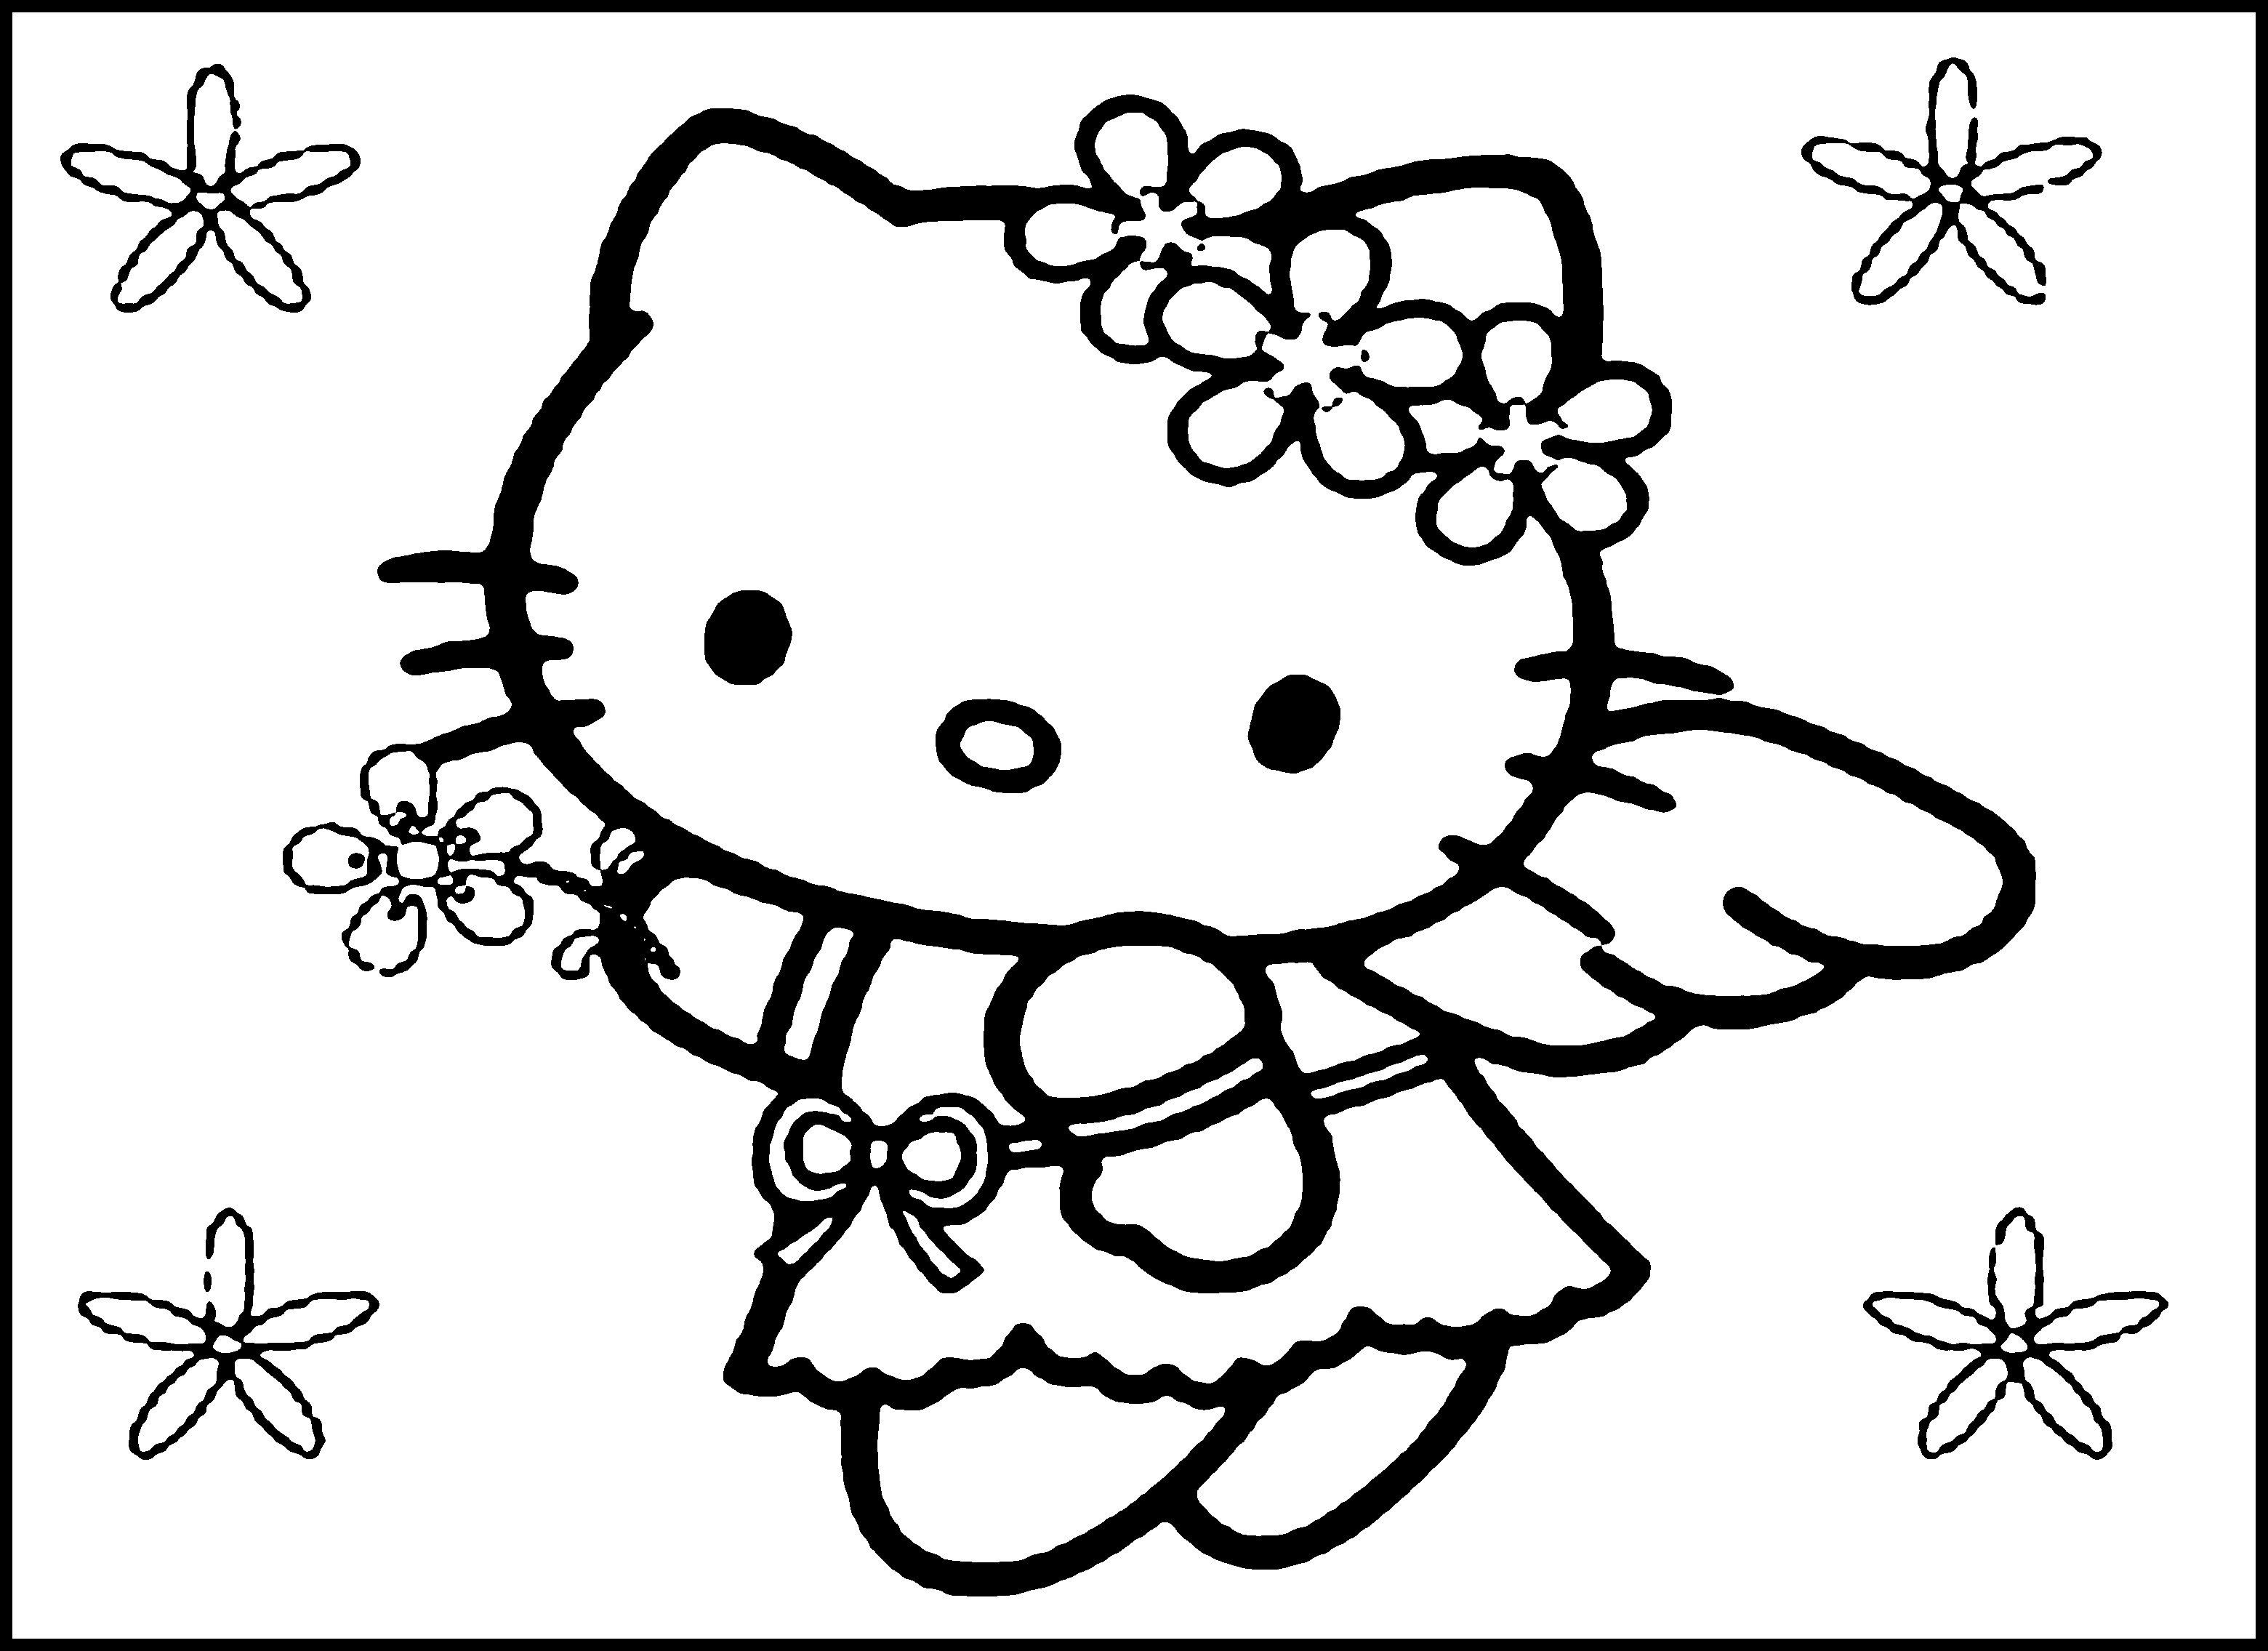 Doodle Art / Doodling - 38+ Hello Kitty Logo Coloring Pages for Adults